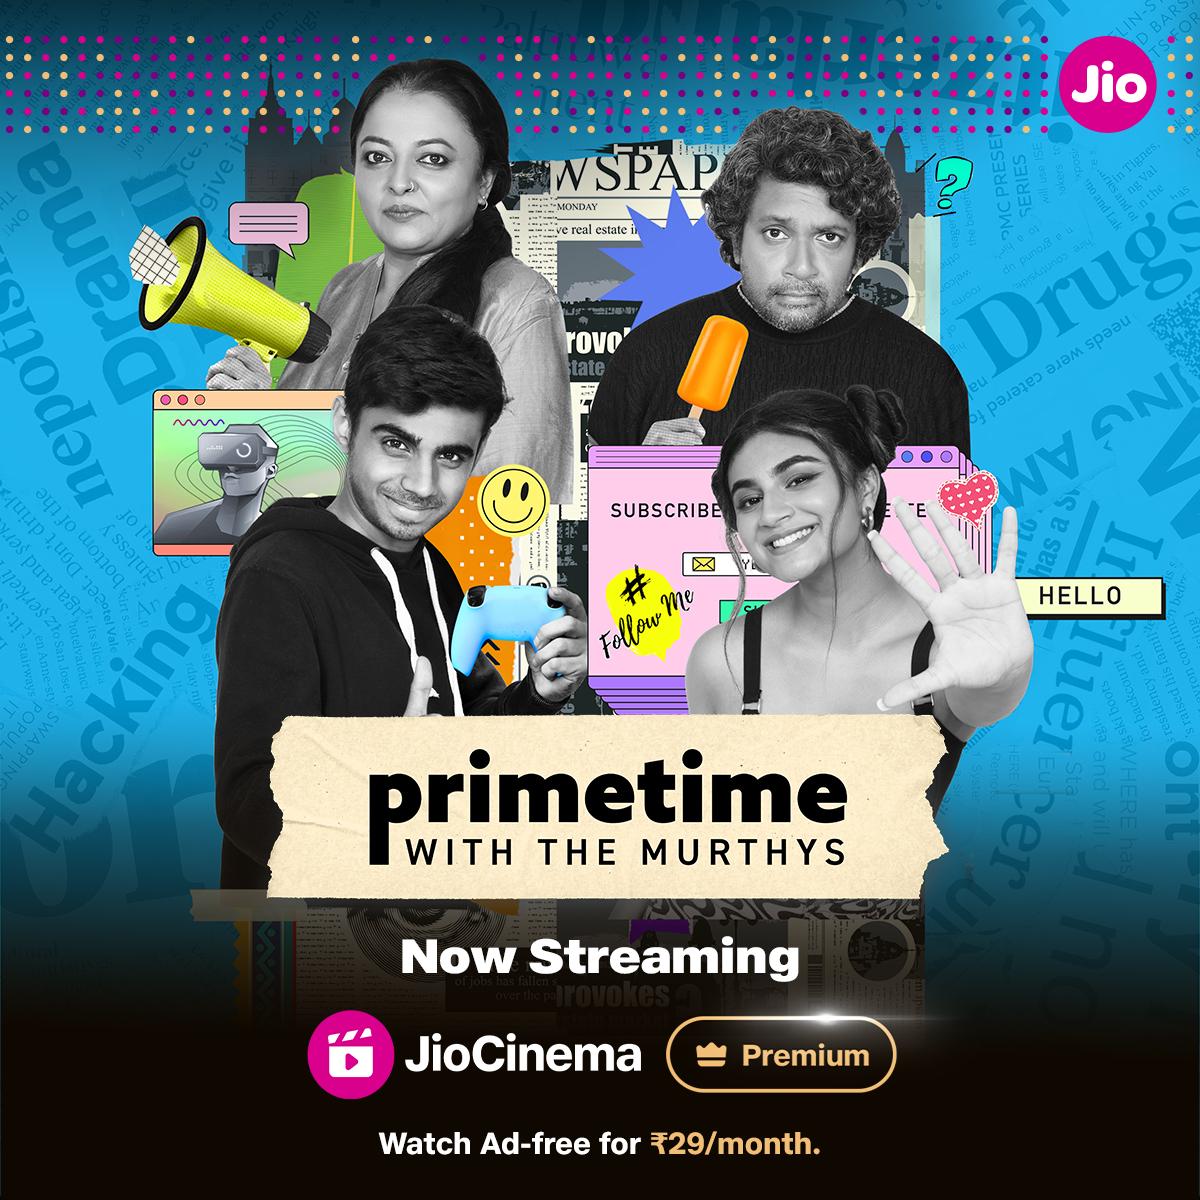 MTV Original Series Production ‘Primetime with the Murthys’ a contemporary family fiction show Launches on JioCinema Premium!